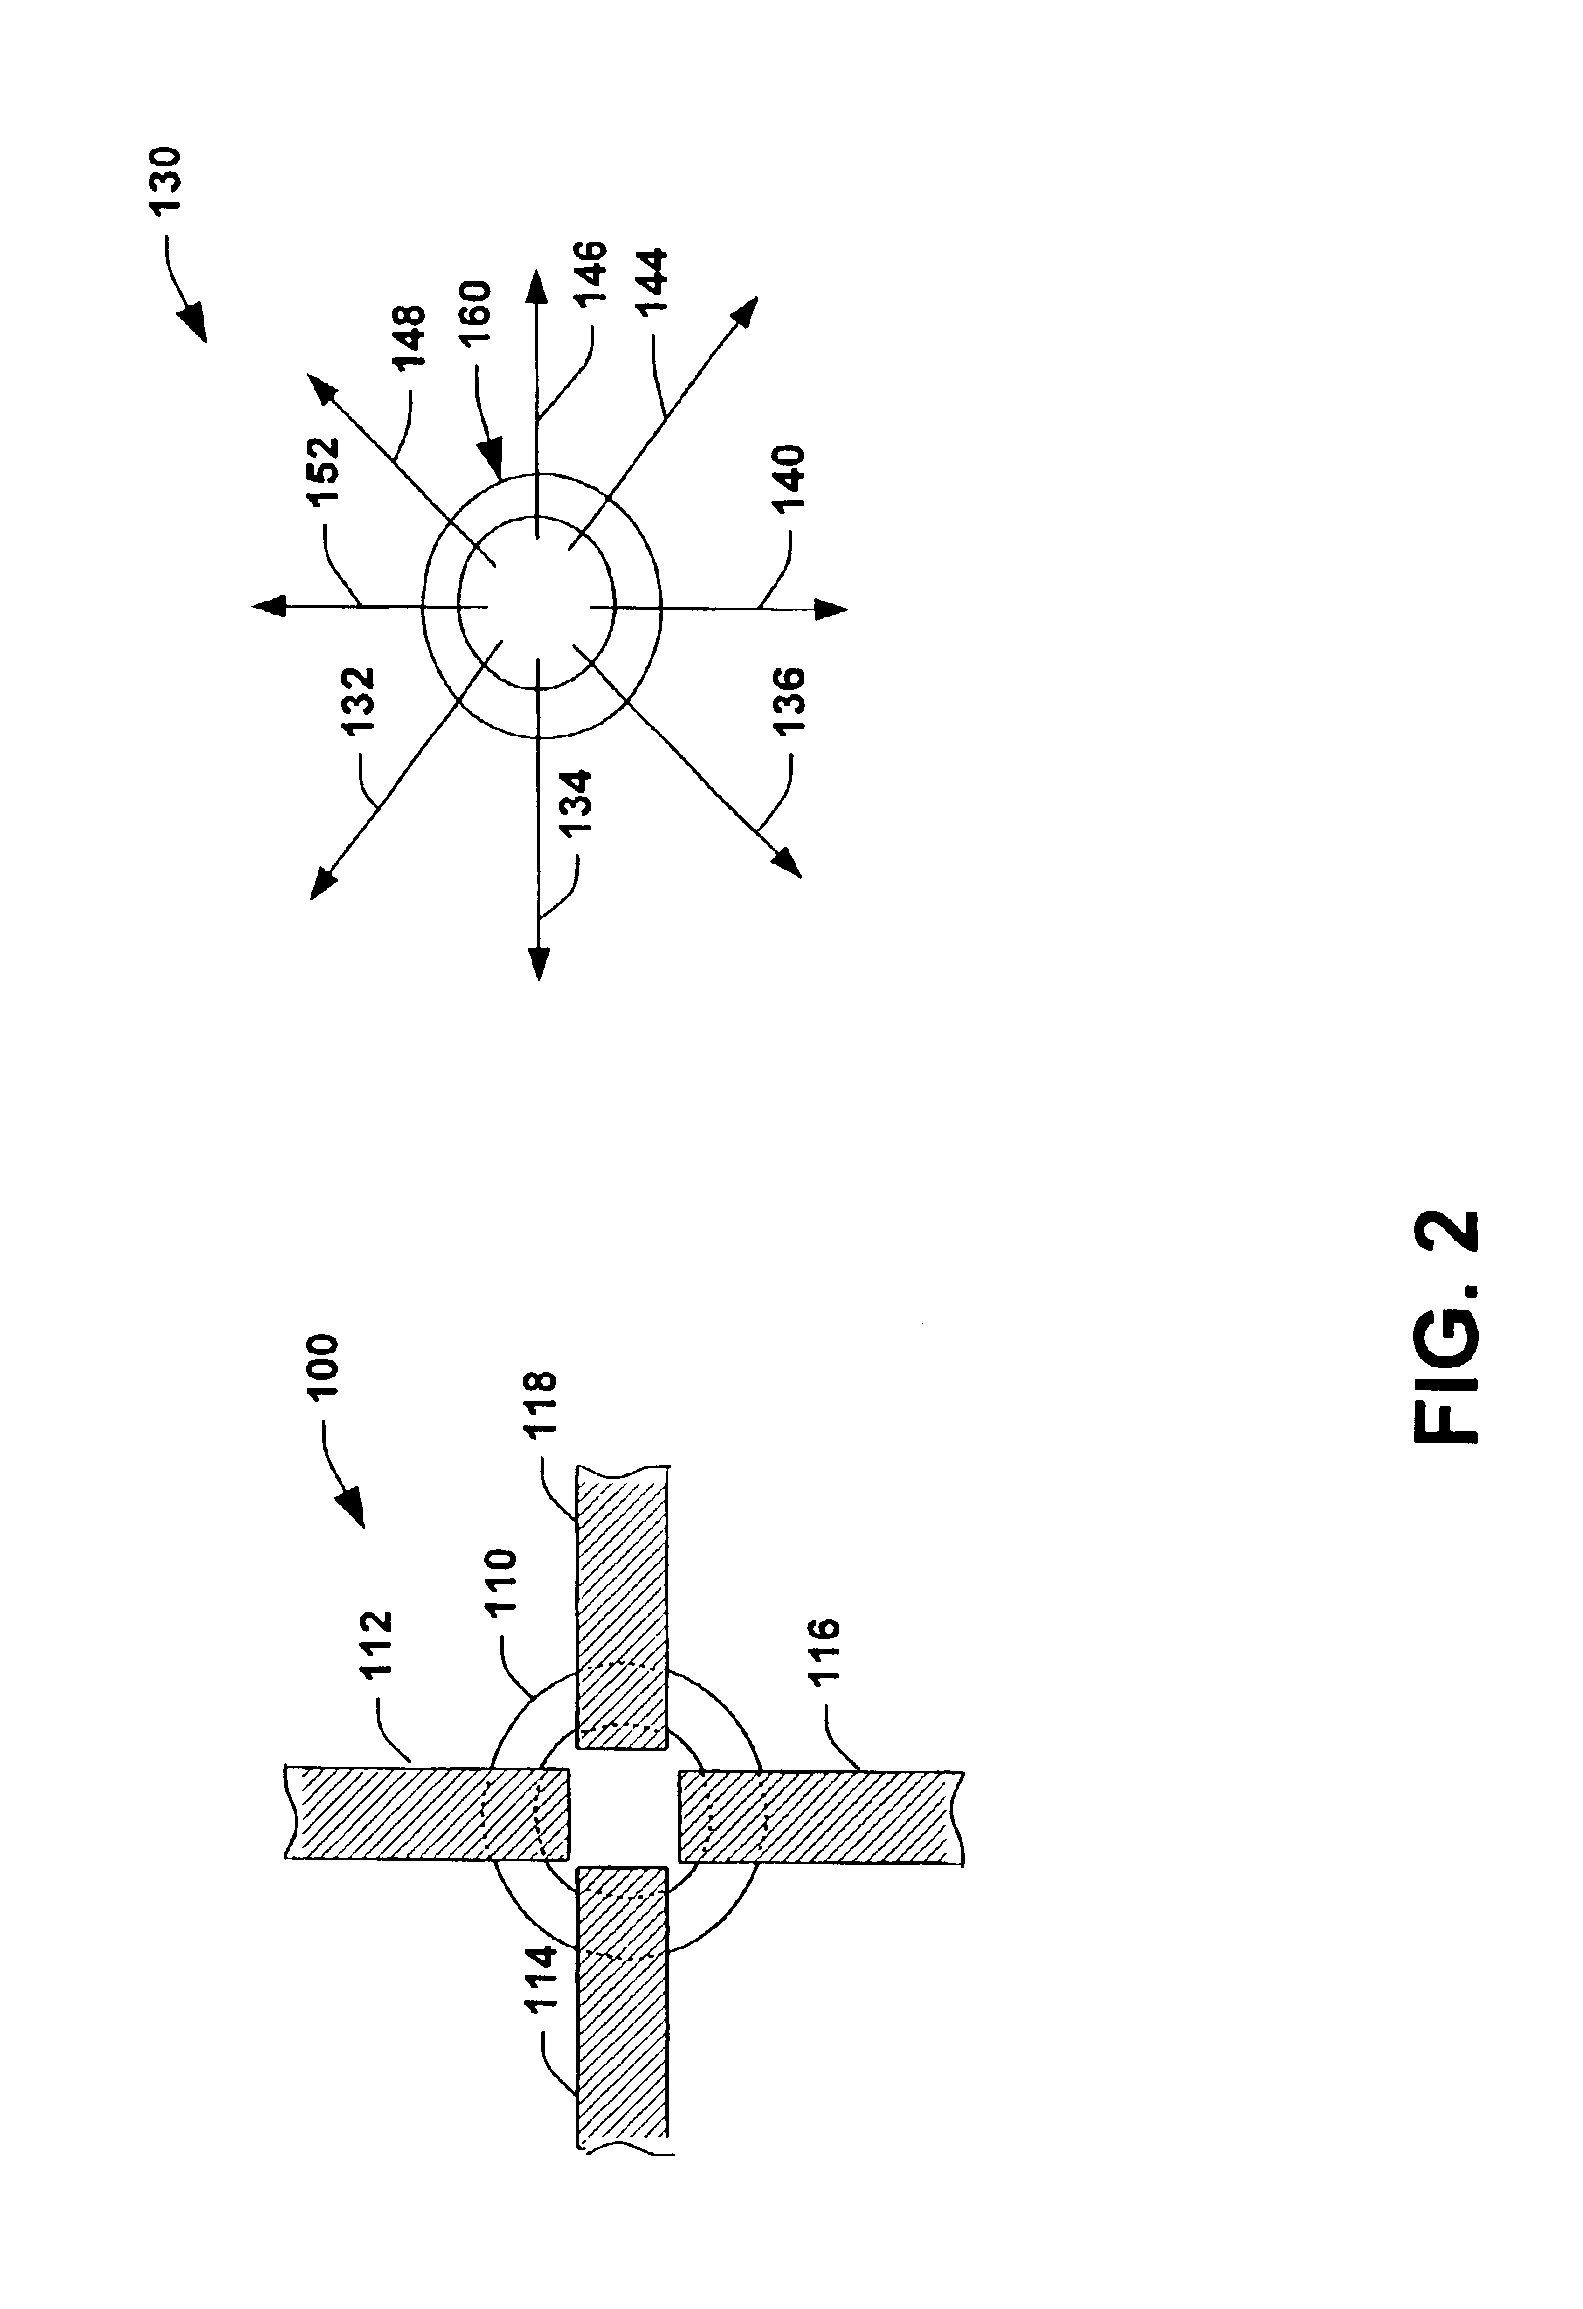 Multi-cell organic memory element and methods of operating and fabricating